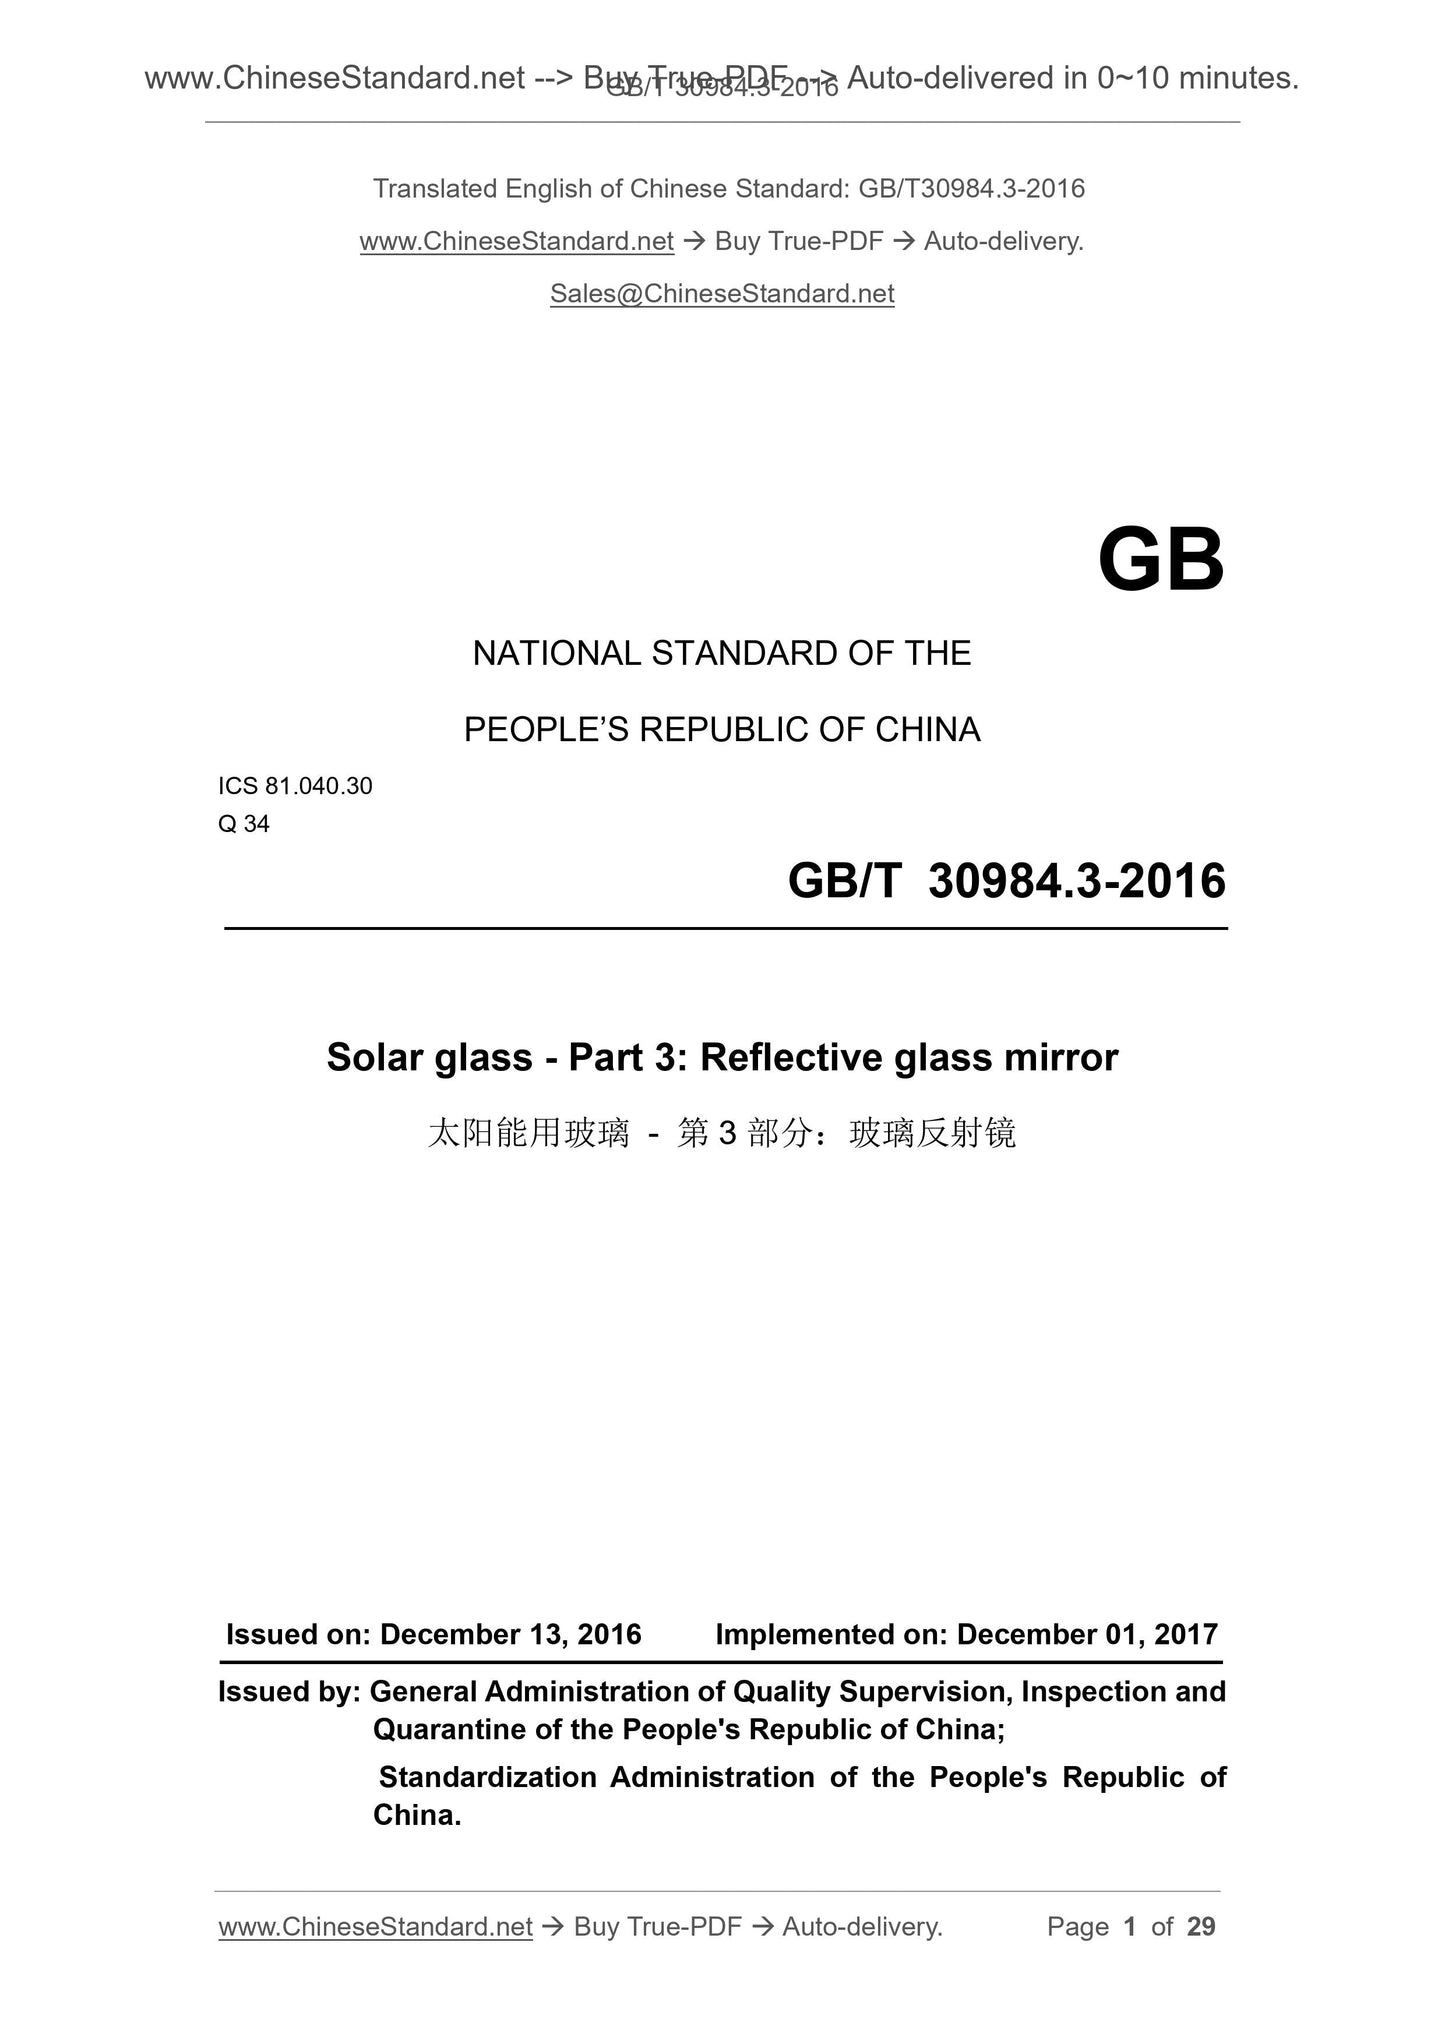 GB/T 30984.3-2016 Page 1